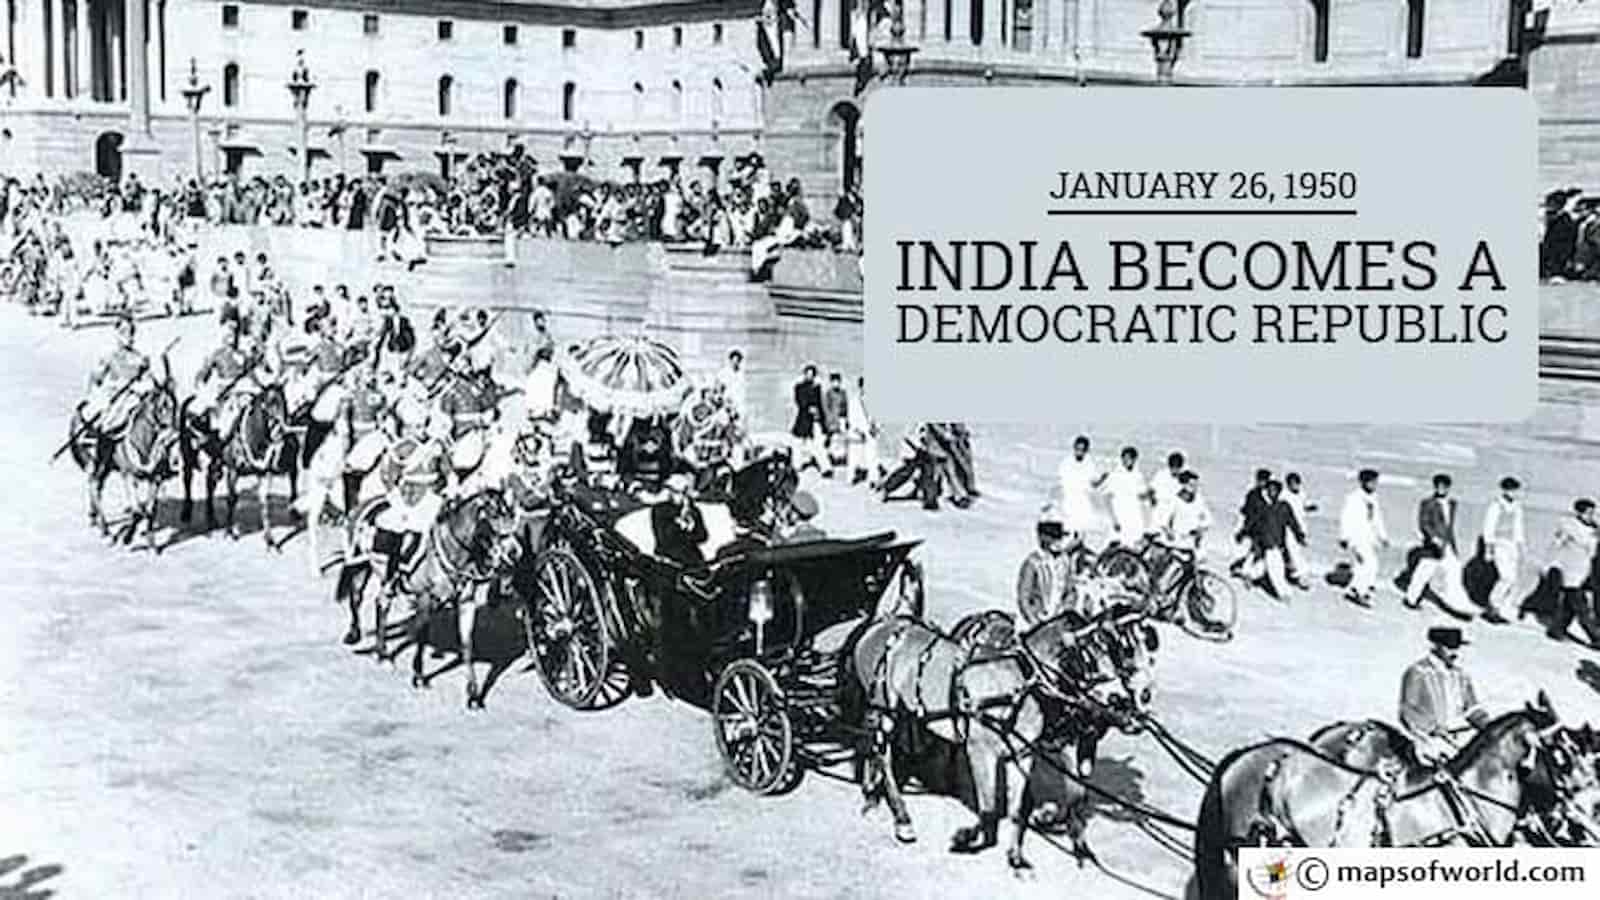 Why do we celebrate the Republic Day of India on 26 January? India was fighting against British colonial rule since 1757. By the 1920s, Indian National Congress emerged as the most prominent voice against the foreign rule. An umbrella organisation of a sort, it tried to win concessions through negotiations. The demand till 1929 was of a dominion status under the English crown. At the Lahore Session in December 1929, under the Presidentship of Pt. Jawaharlal Nehru a resolution for Purna Swaraj (complete independence) was passed. Complete independence was declared as the goal of Congress. Congress Working Committee took oath on the Purna Swaraj Resolution at the midnight of 31 December 1929. Afterwards Nehru hoisted a tricolour flag. It was decided that on 26 January, Indians would celebrate Independence Day. On 26 January 1930, people across the country came out with tricolour national flags, took out procession and took pledge on the Purna Swaraj resolution publically. From 1930 till 1947, 26 January was celebrated as the independence day by a majority of Indians. When India attained independence on 15 August 1947 and the constitution was completed on 26 November 1949, the Indian leadership wanted that 26 January should remain an important date. So, it was decided that the constitution would be implemented on 26 January 1950. Thus making this date the Republic Day of India when every year the national flag would be hoisted by the head of the state in continuation of a practice established by the Congress leadership between 1930 and 1947.